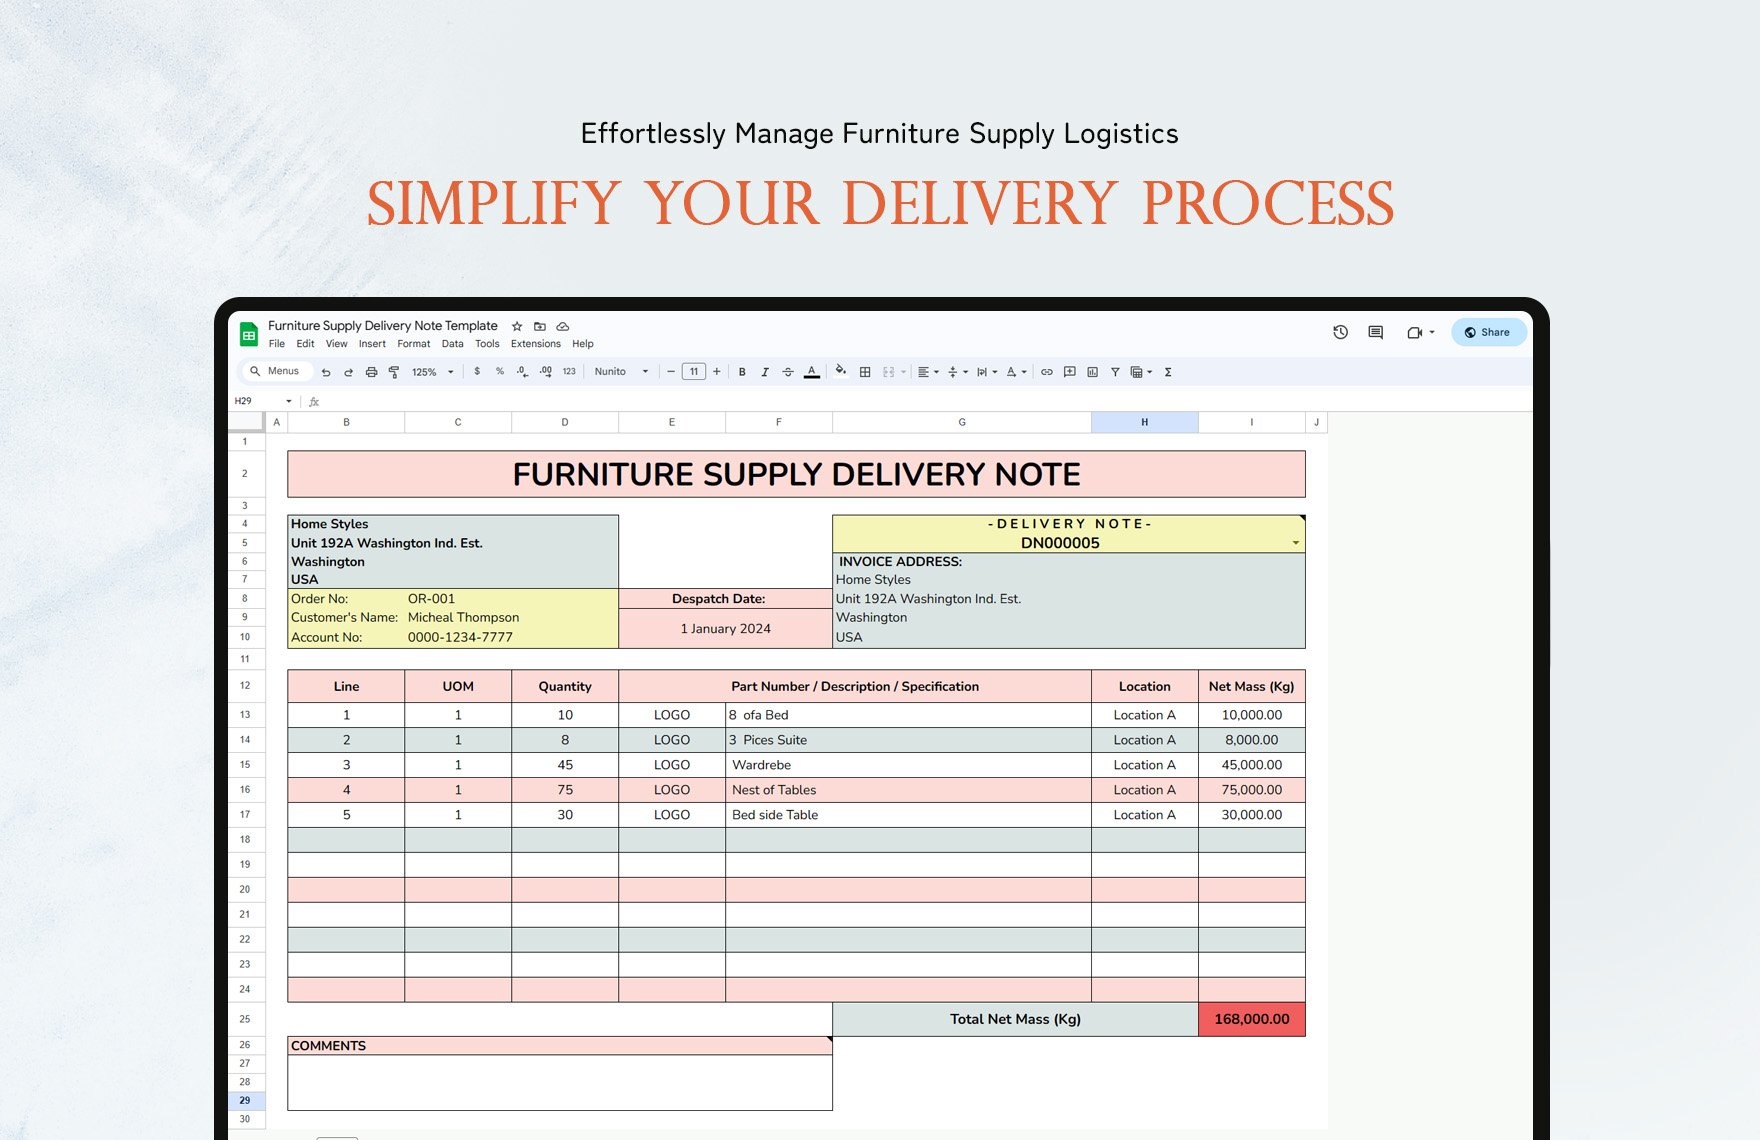 Furniture Supply Delivery Note Template